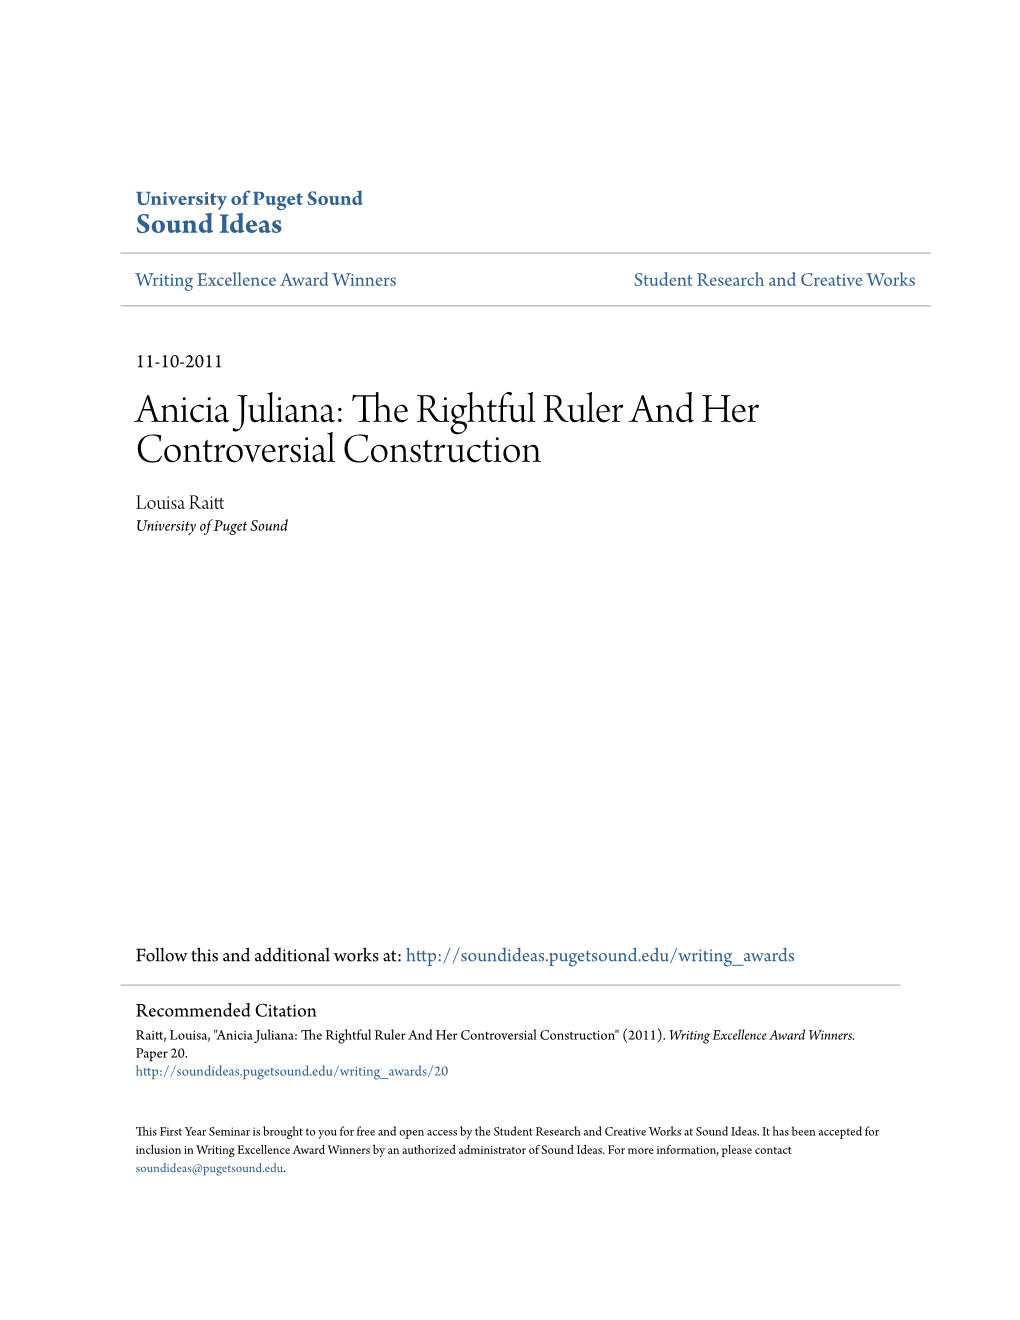 Anicia Juliana: the Rightful Ruler and Her Controversial Construction Louisa Raitt University of Puget Sound